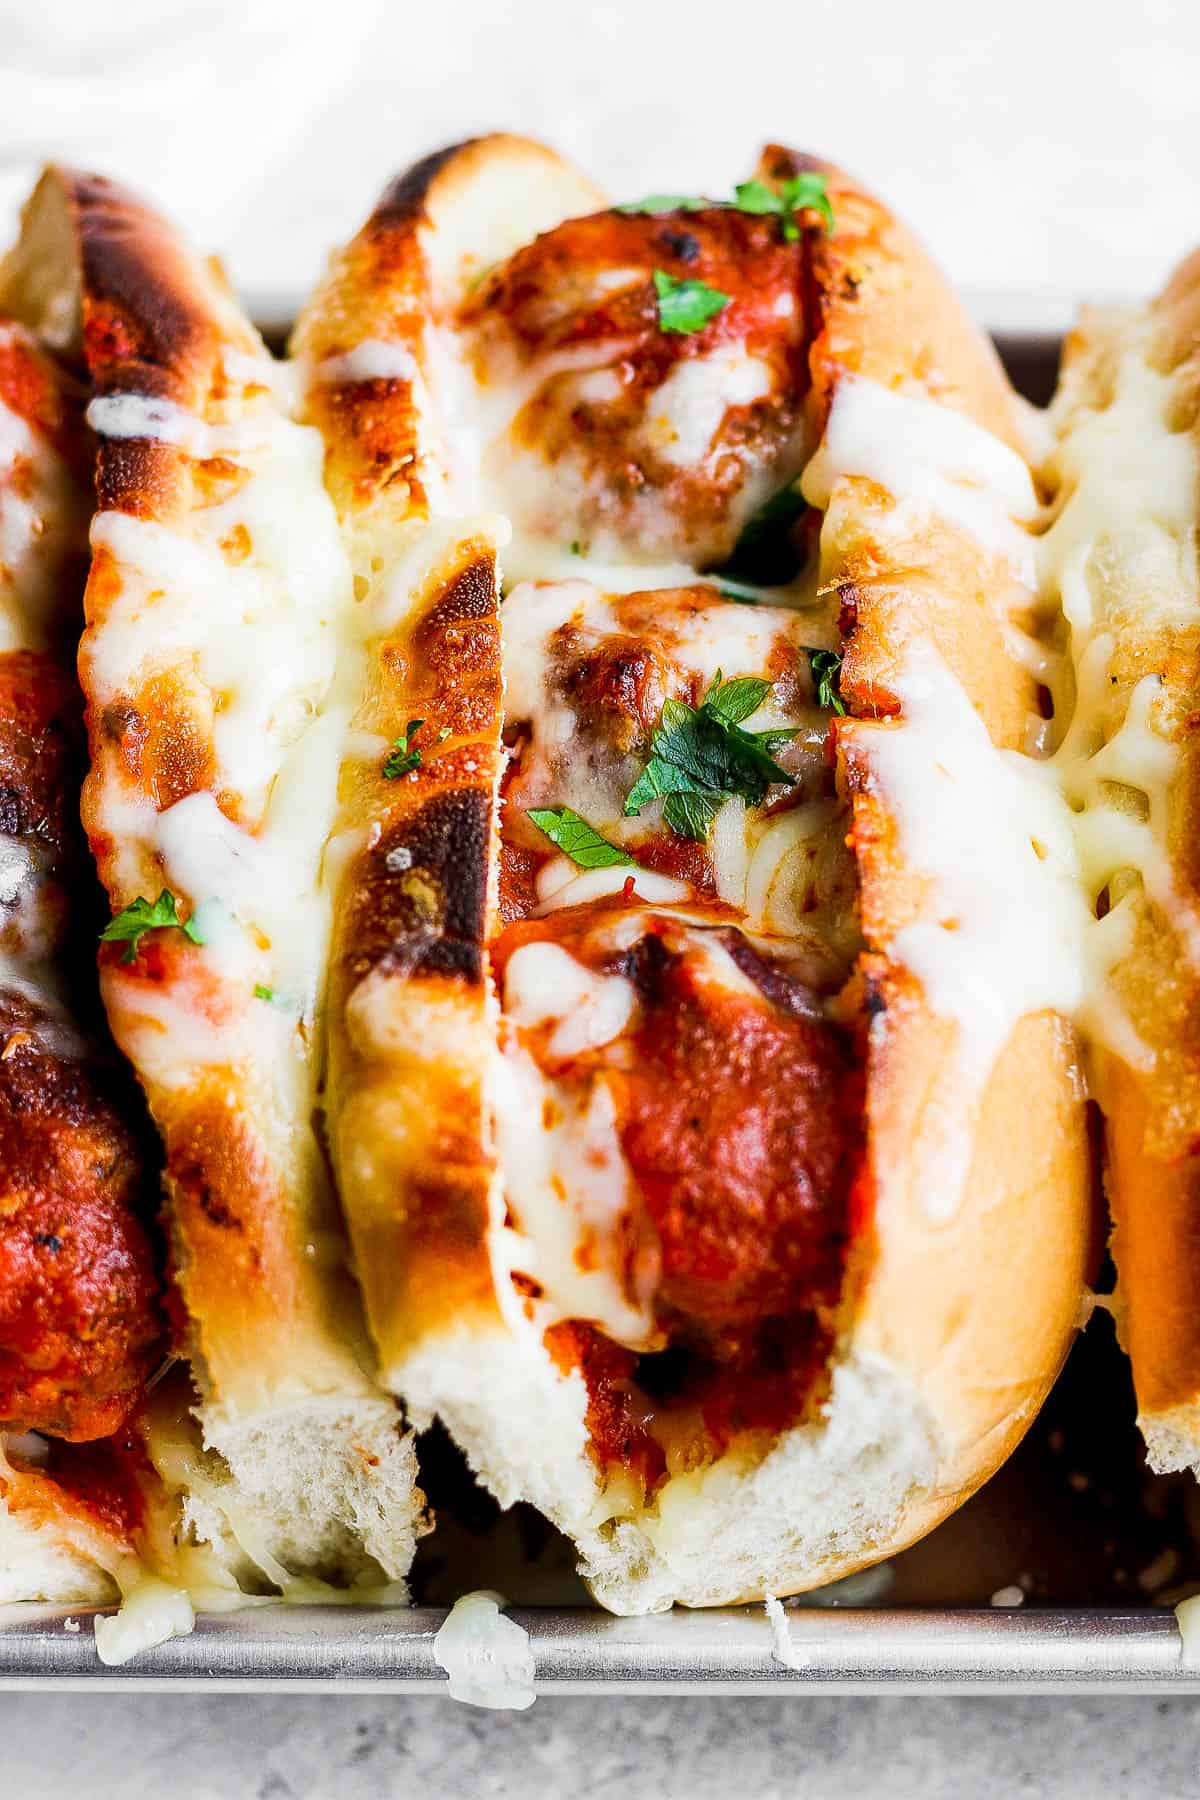 A close up of a fully broiled meatball sub.